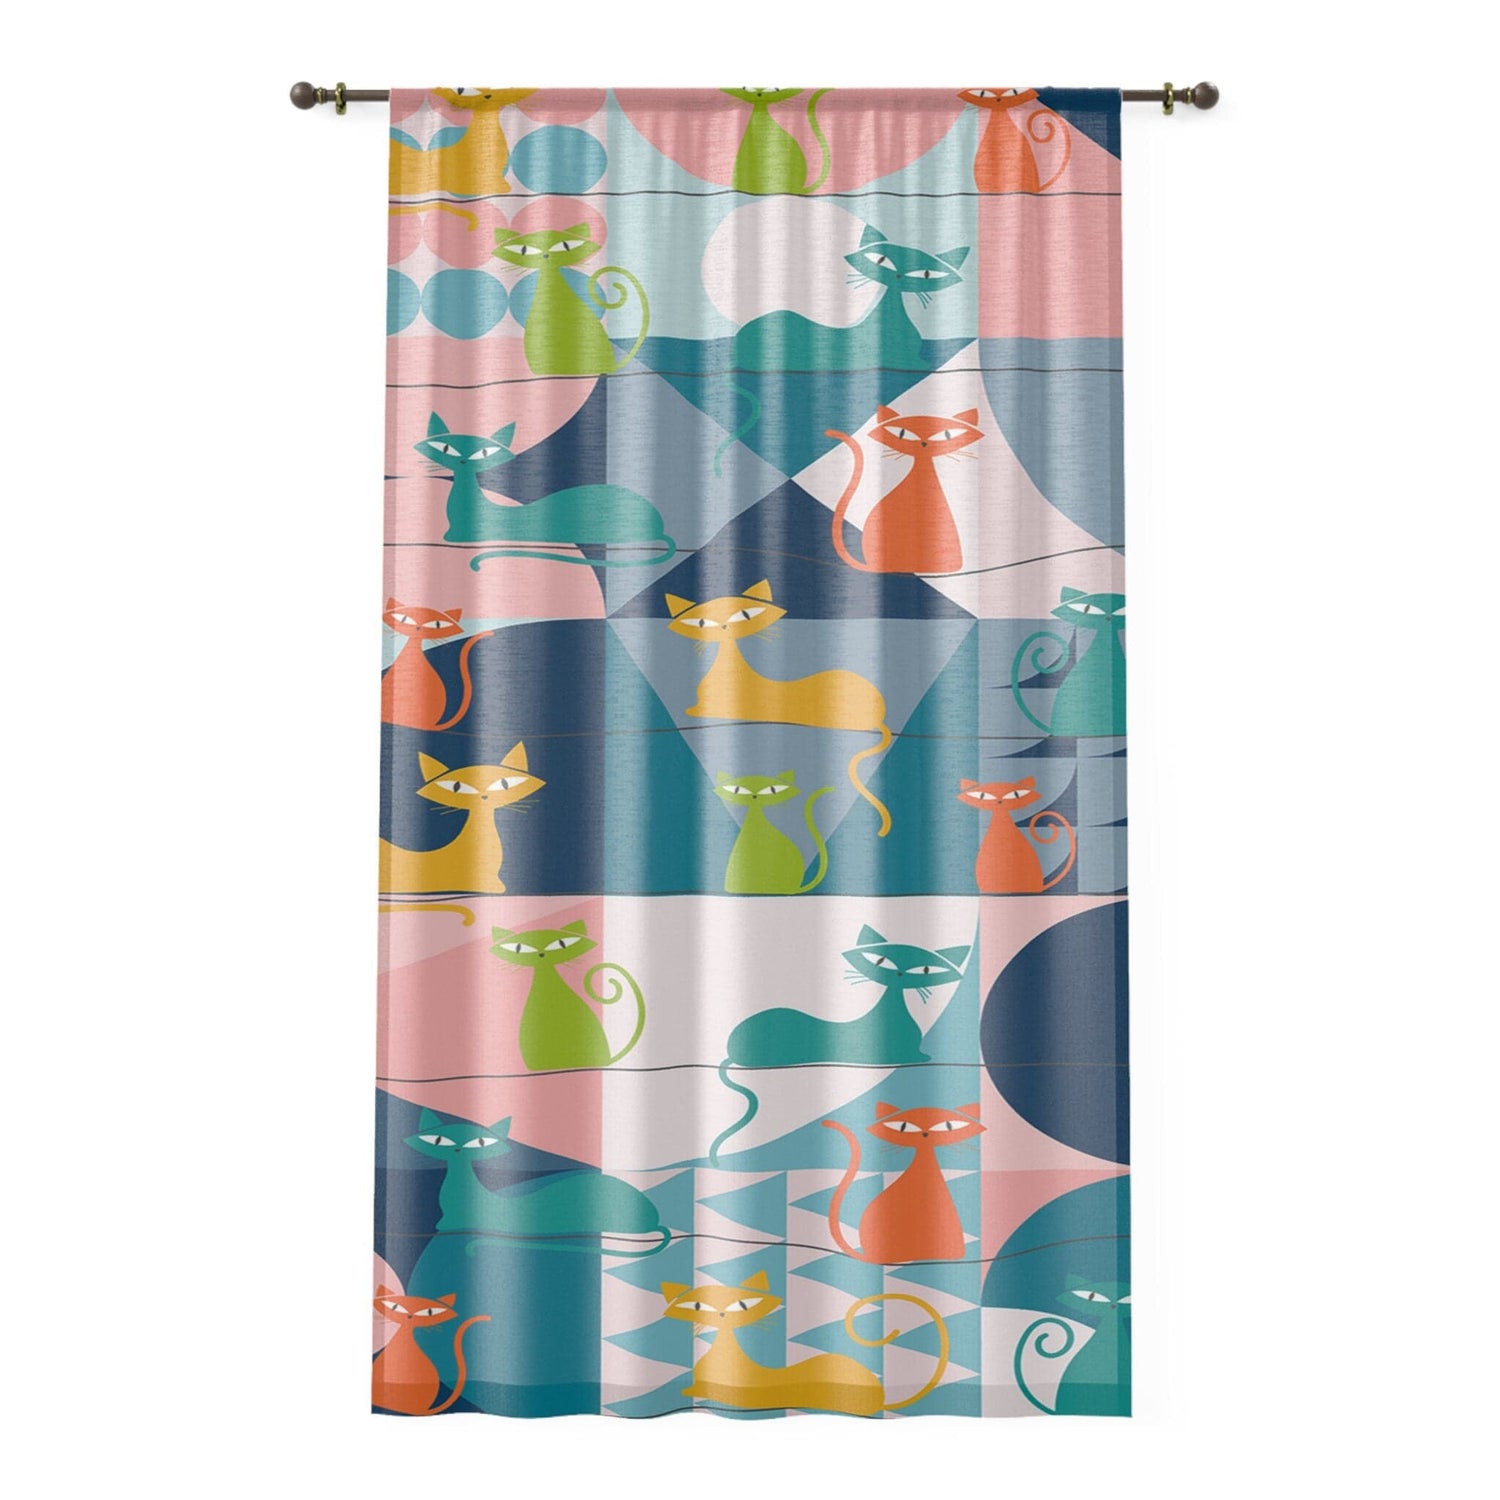 Mid Century Modern Atomic Kitschy Cats Window Curtain in Geometric Retro Teal, Pink, Orange, and Yellow, Sheer &amp; Blackout MCM Window Panels